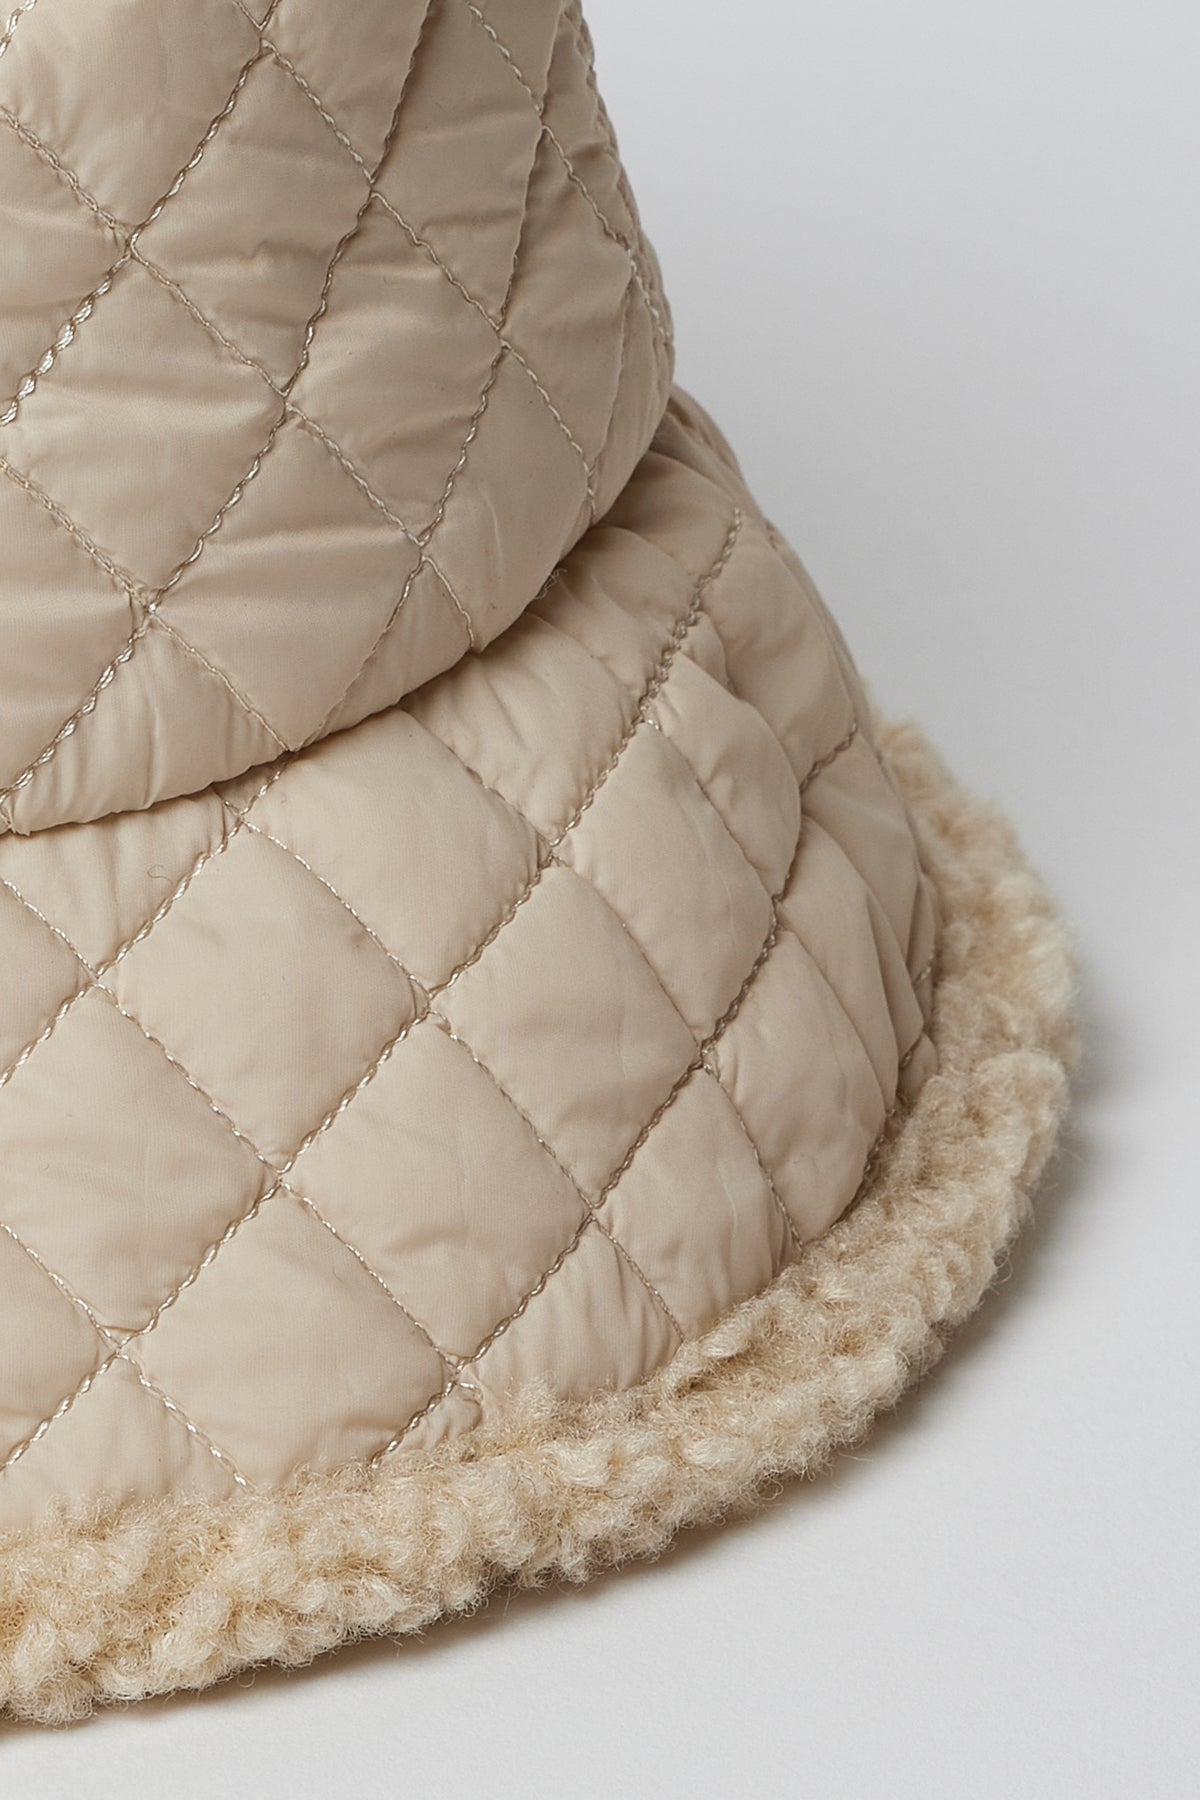   Detail of quilting and edge of ivory bucket hat 